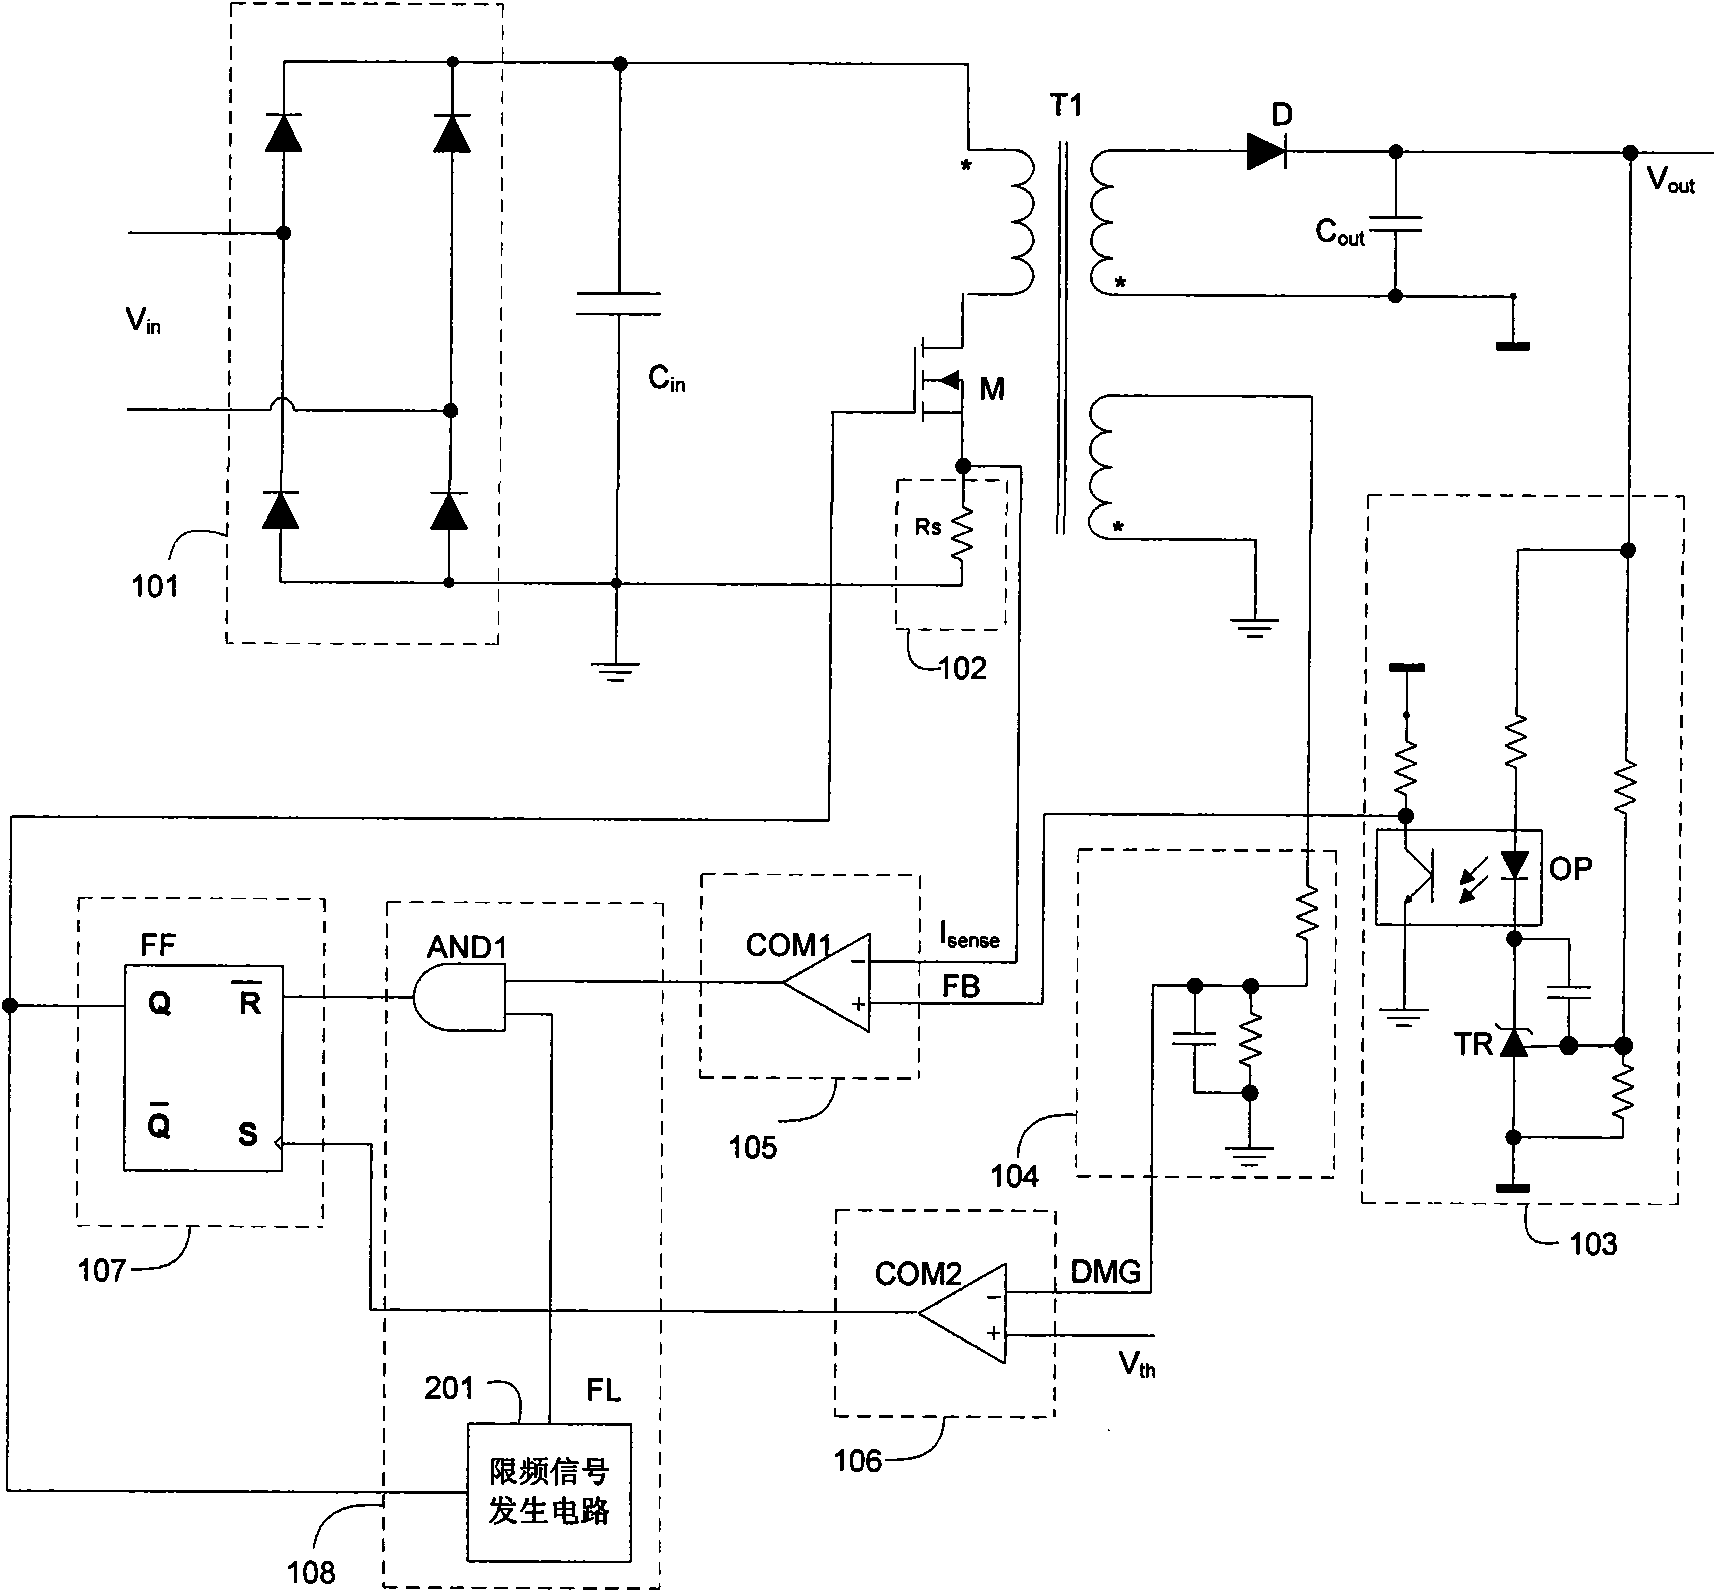 A switch voltage regulation circuit and method with a frequency limiting function